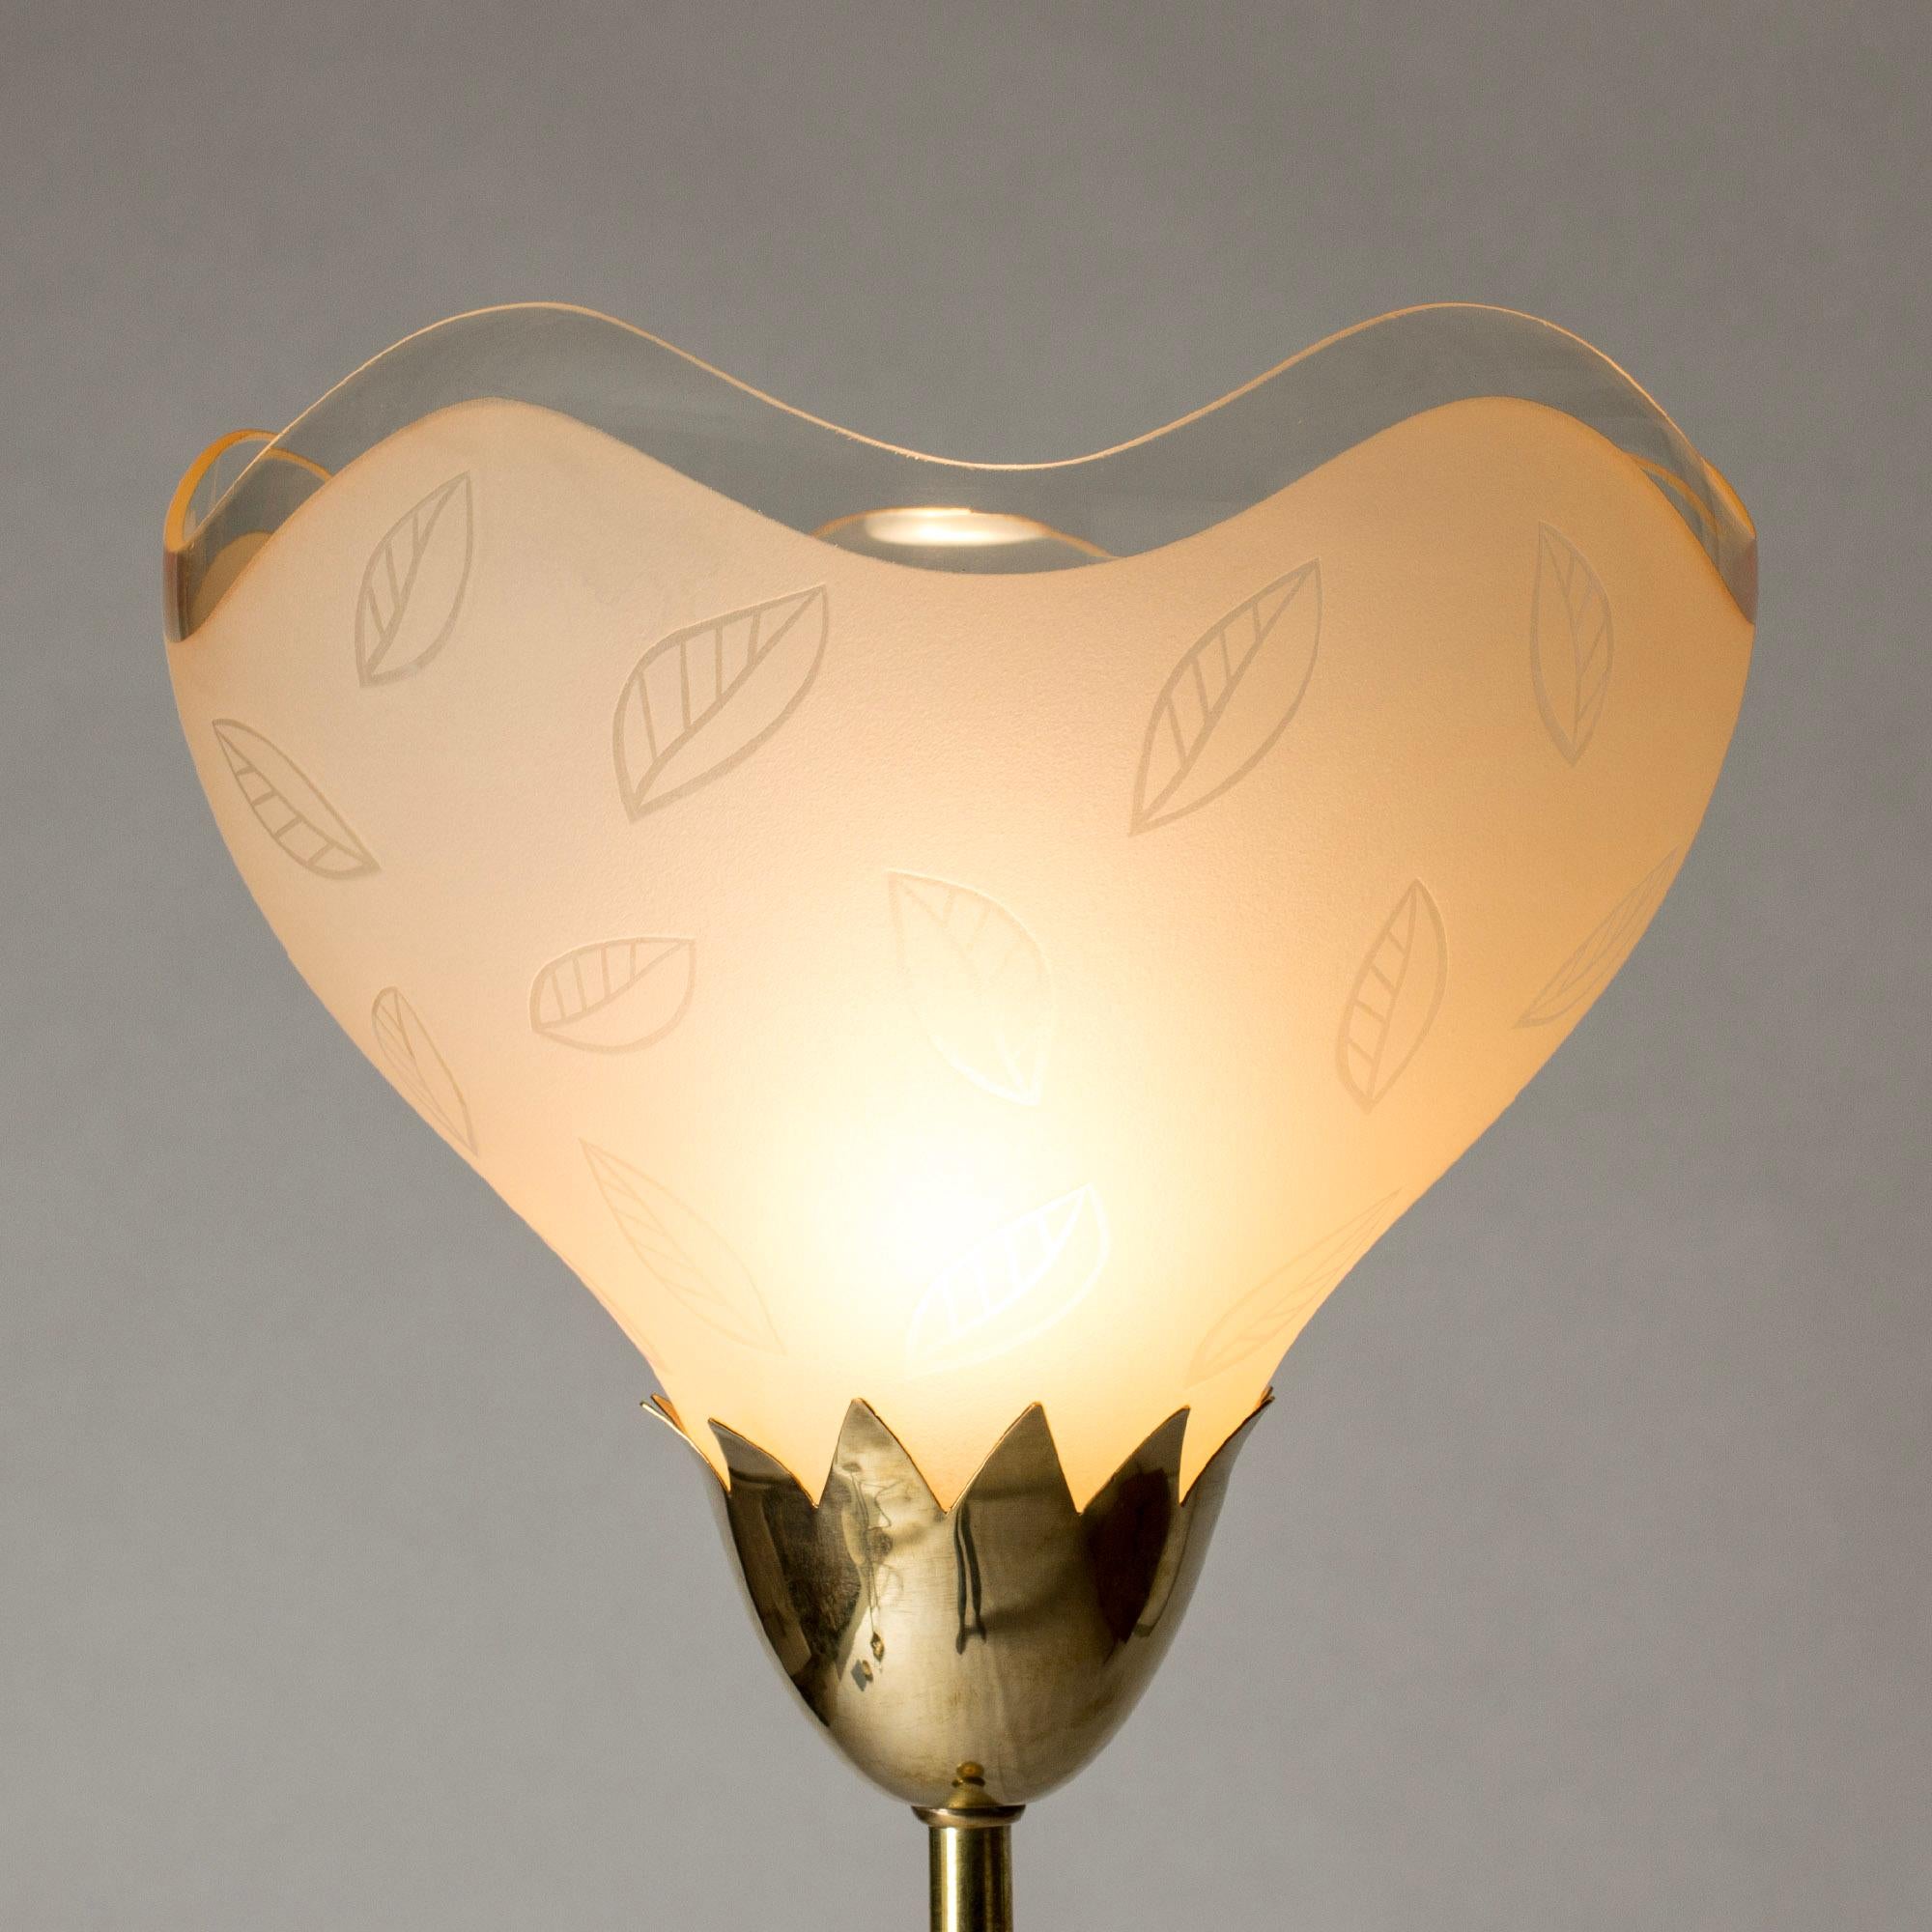 Mid-20th Century Swedish Grace Floor lamp, brass and glass, Orrefors, Sweden, 1940s For Sale